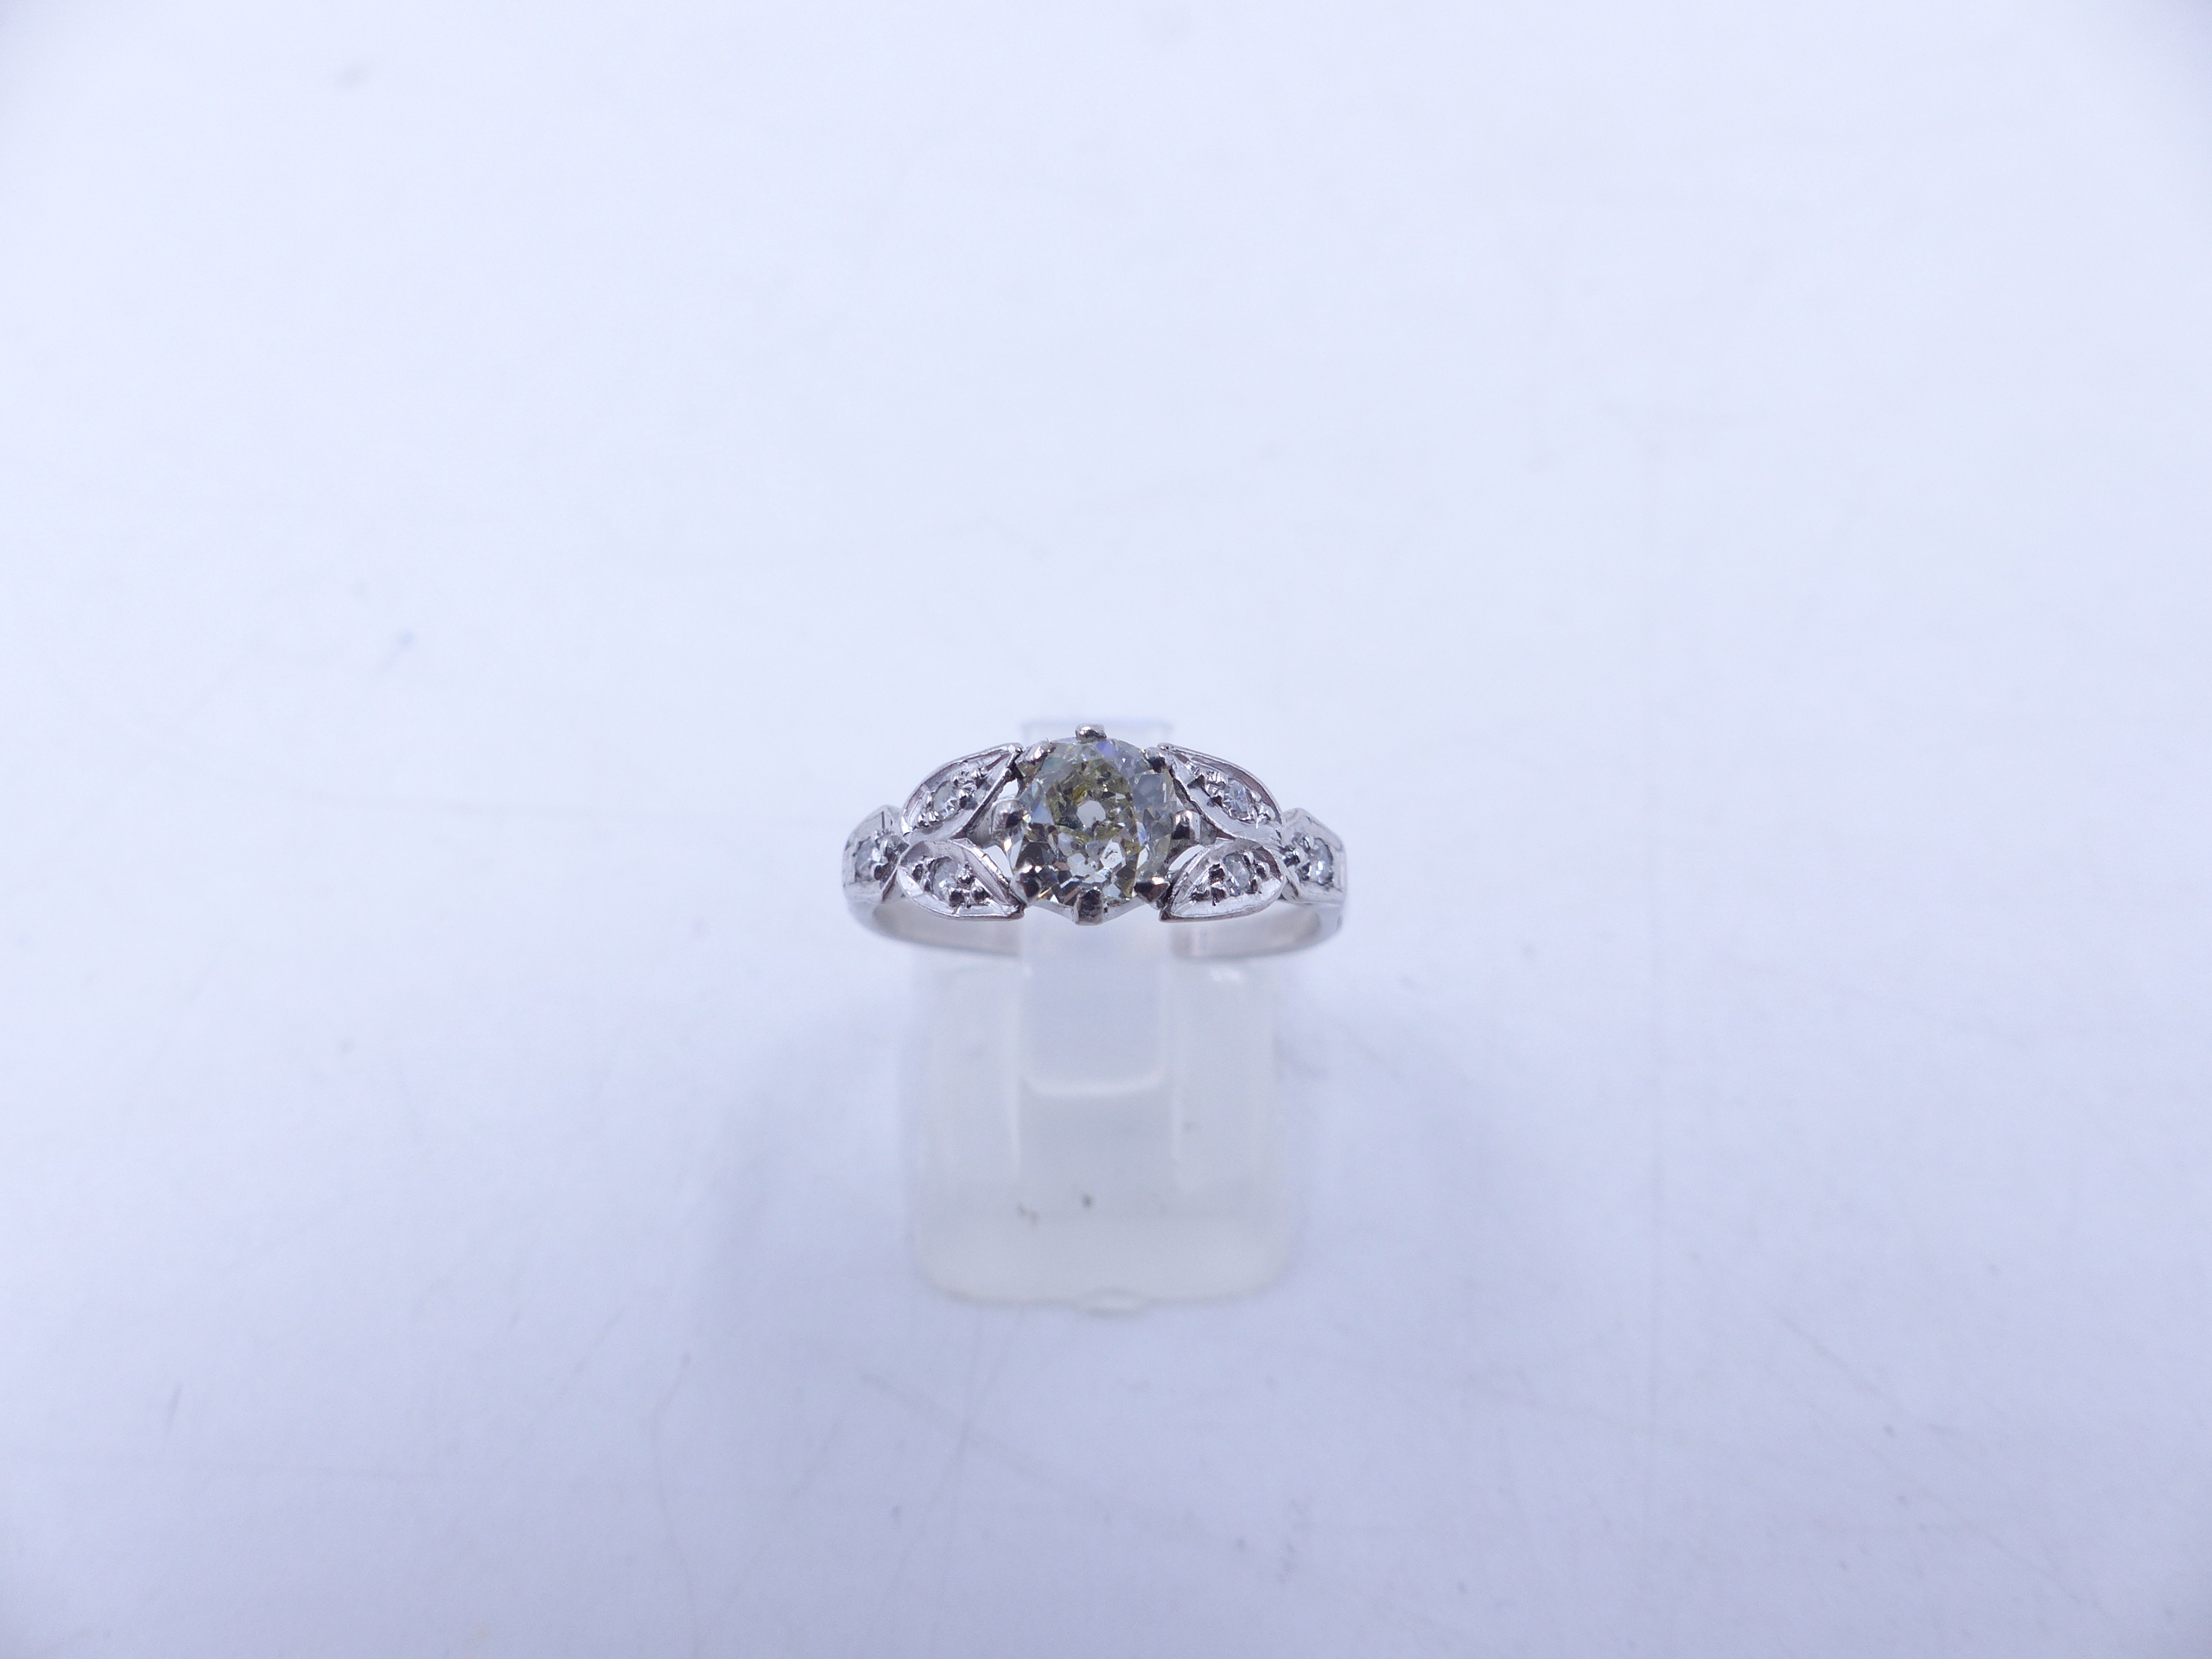 AN 18ct STAMPED OLD CUT DIAMOND RING. THE CENTRAL OLD CUT DIAMOND IS HELD IN AN EIGHT CLAW SETTING - Image 10 of 14